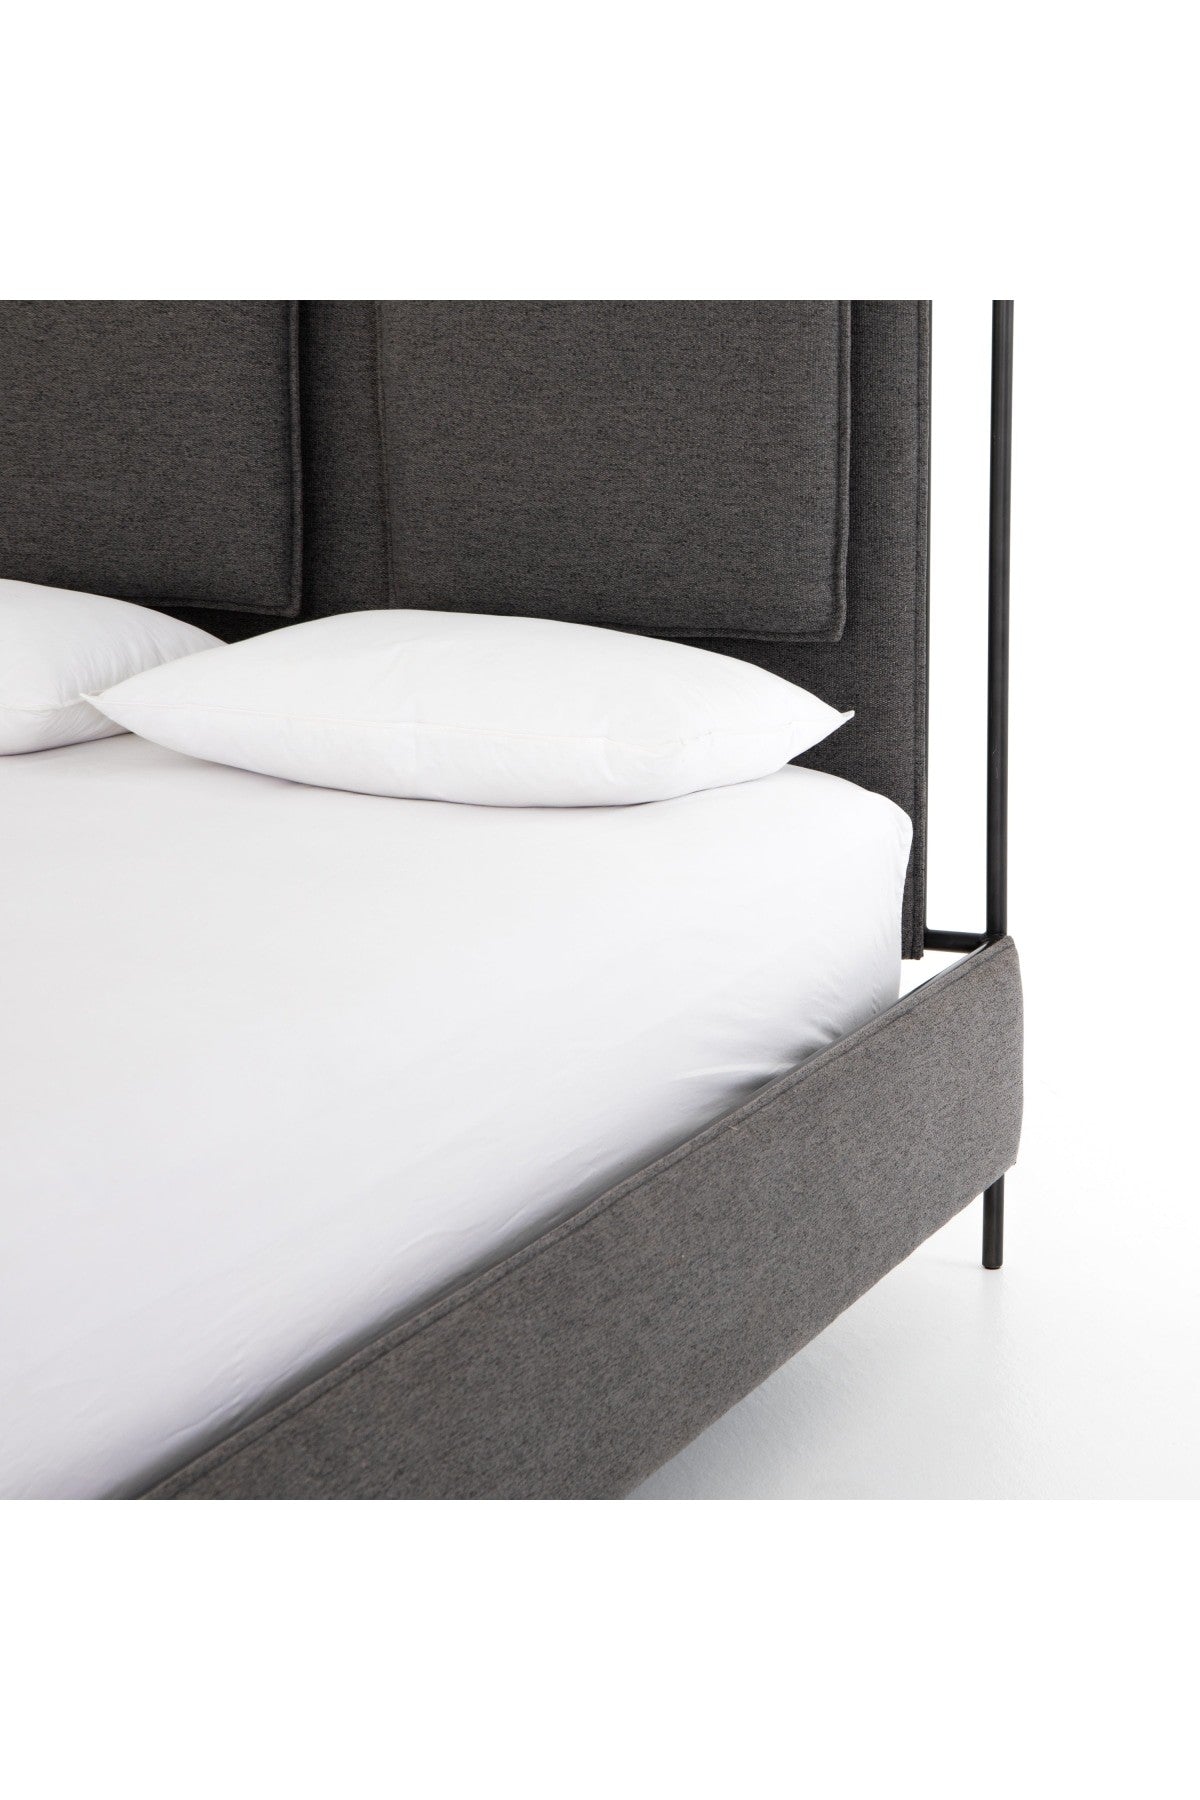 Irondale Bed - San Remo Ash